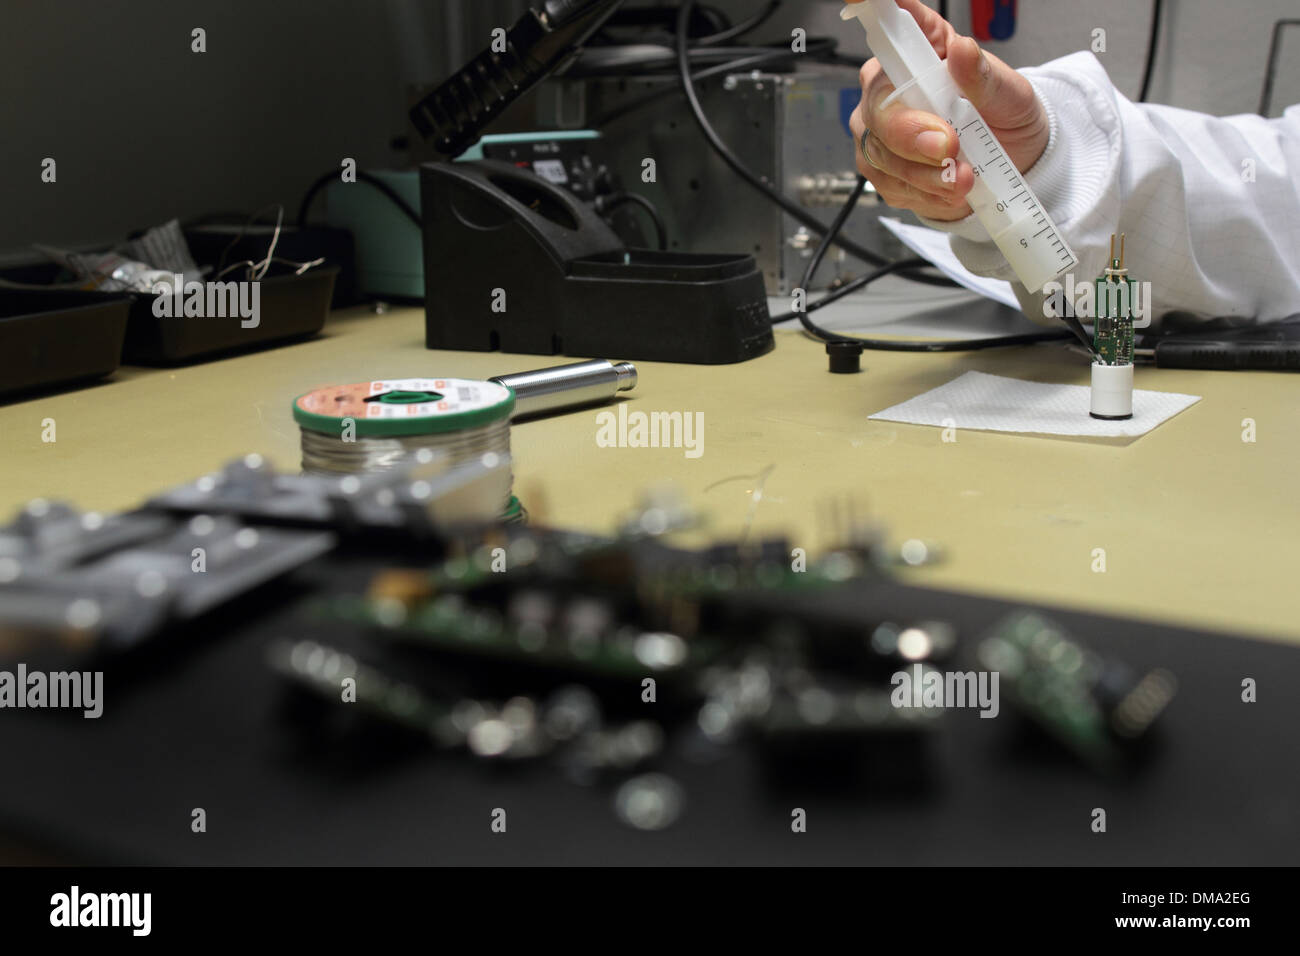 a person is cluing a microelectronics device Stock Photo